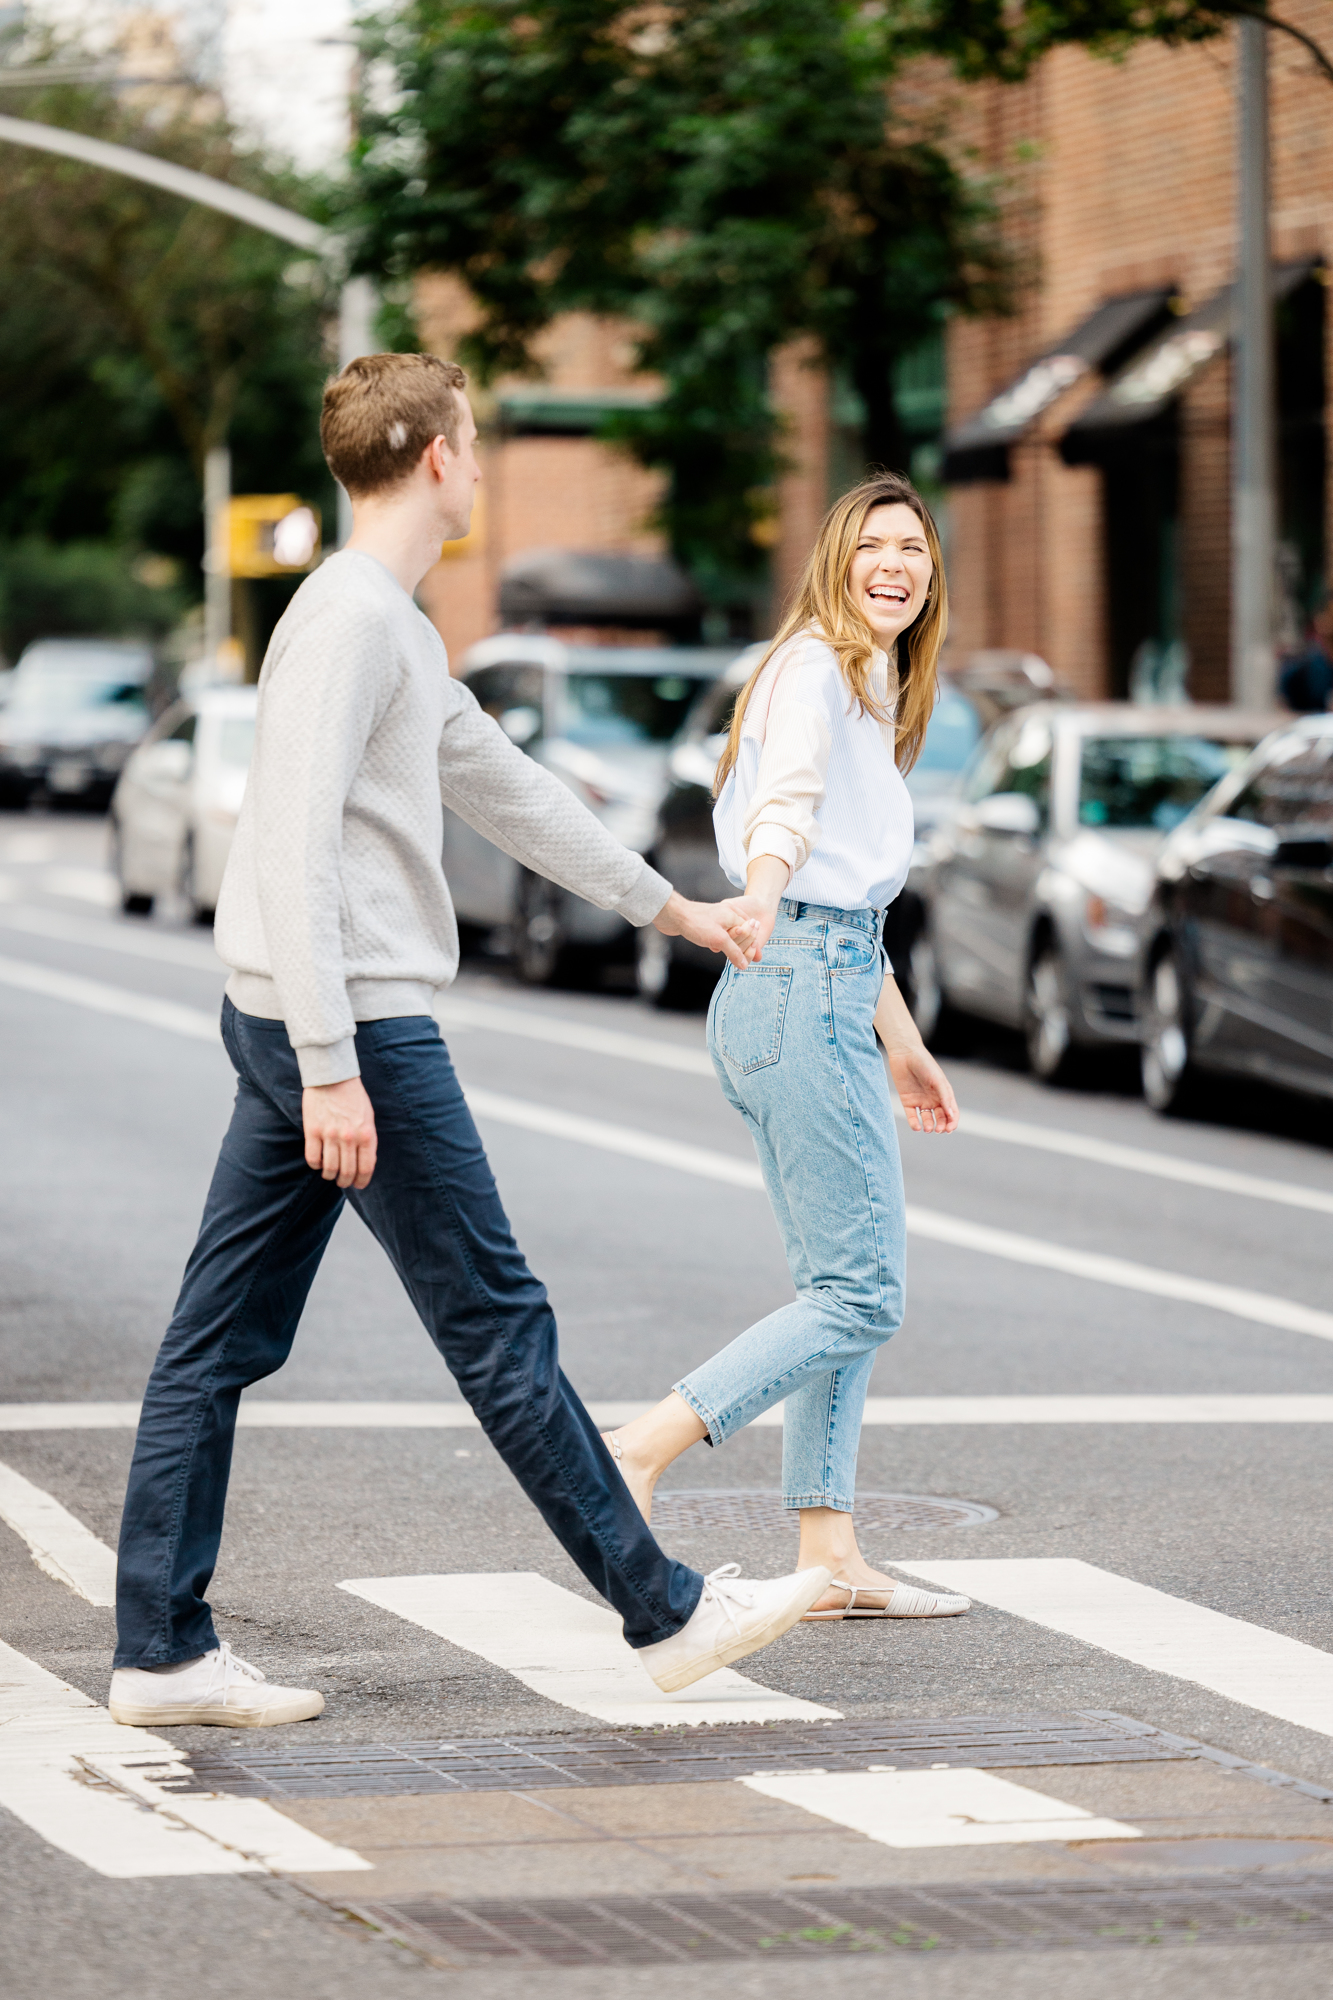 Candid Summer Engagement Photography in the West Village